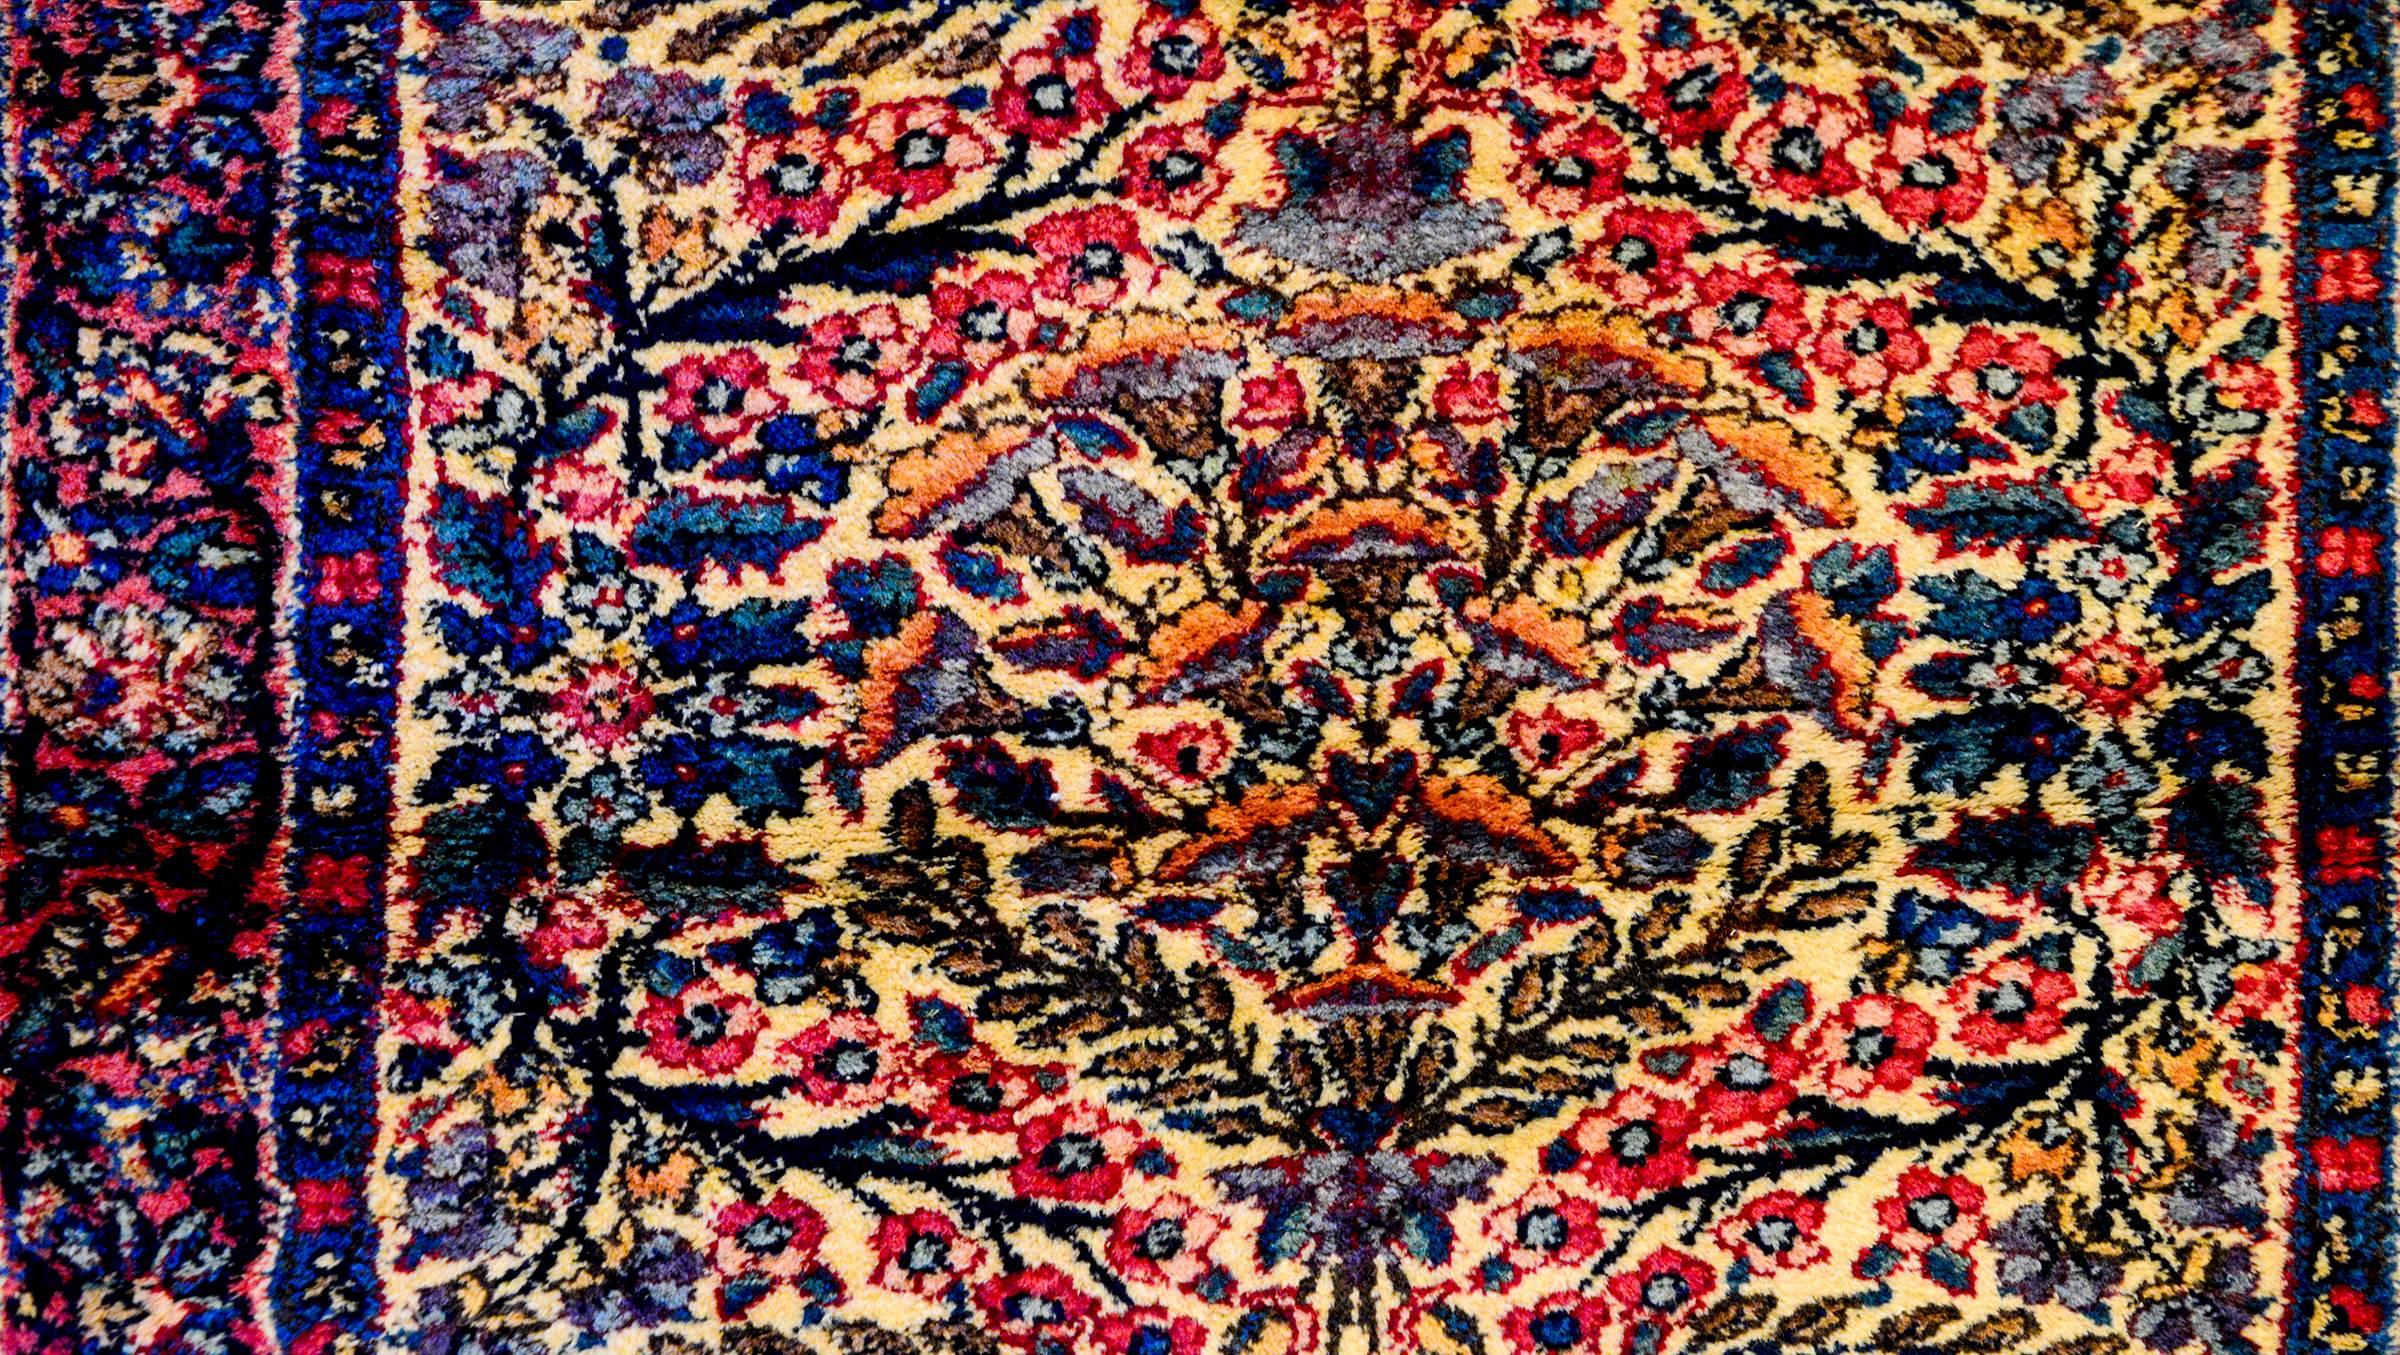 A wonderful early 20th century Persian Kirman rug with a densely woven mirrored floral and leaf pattern woven in indigo, pink, gold and green vegetable dyed wool. The border is contrasting with a wide floral and vine patterned band flanked by two